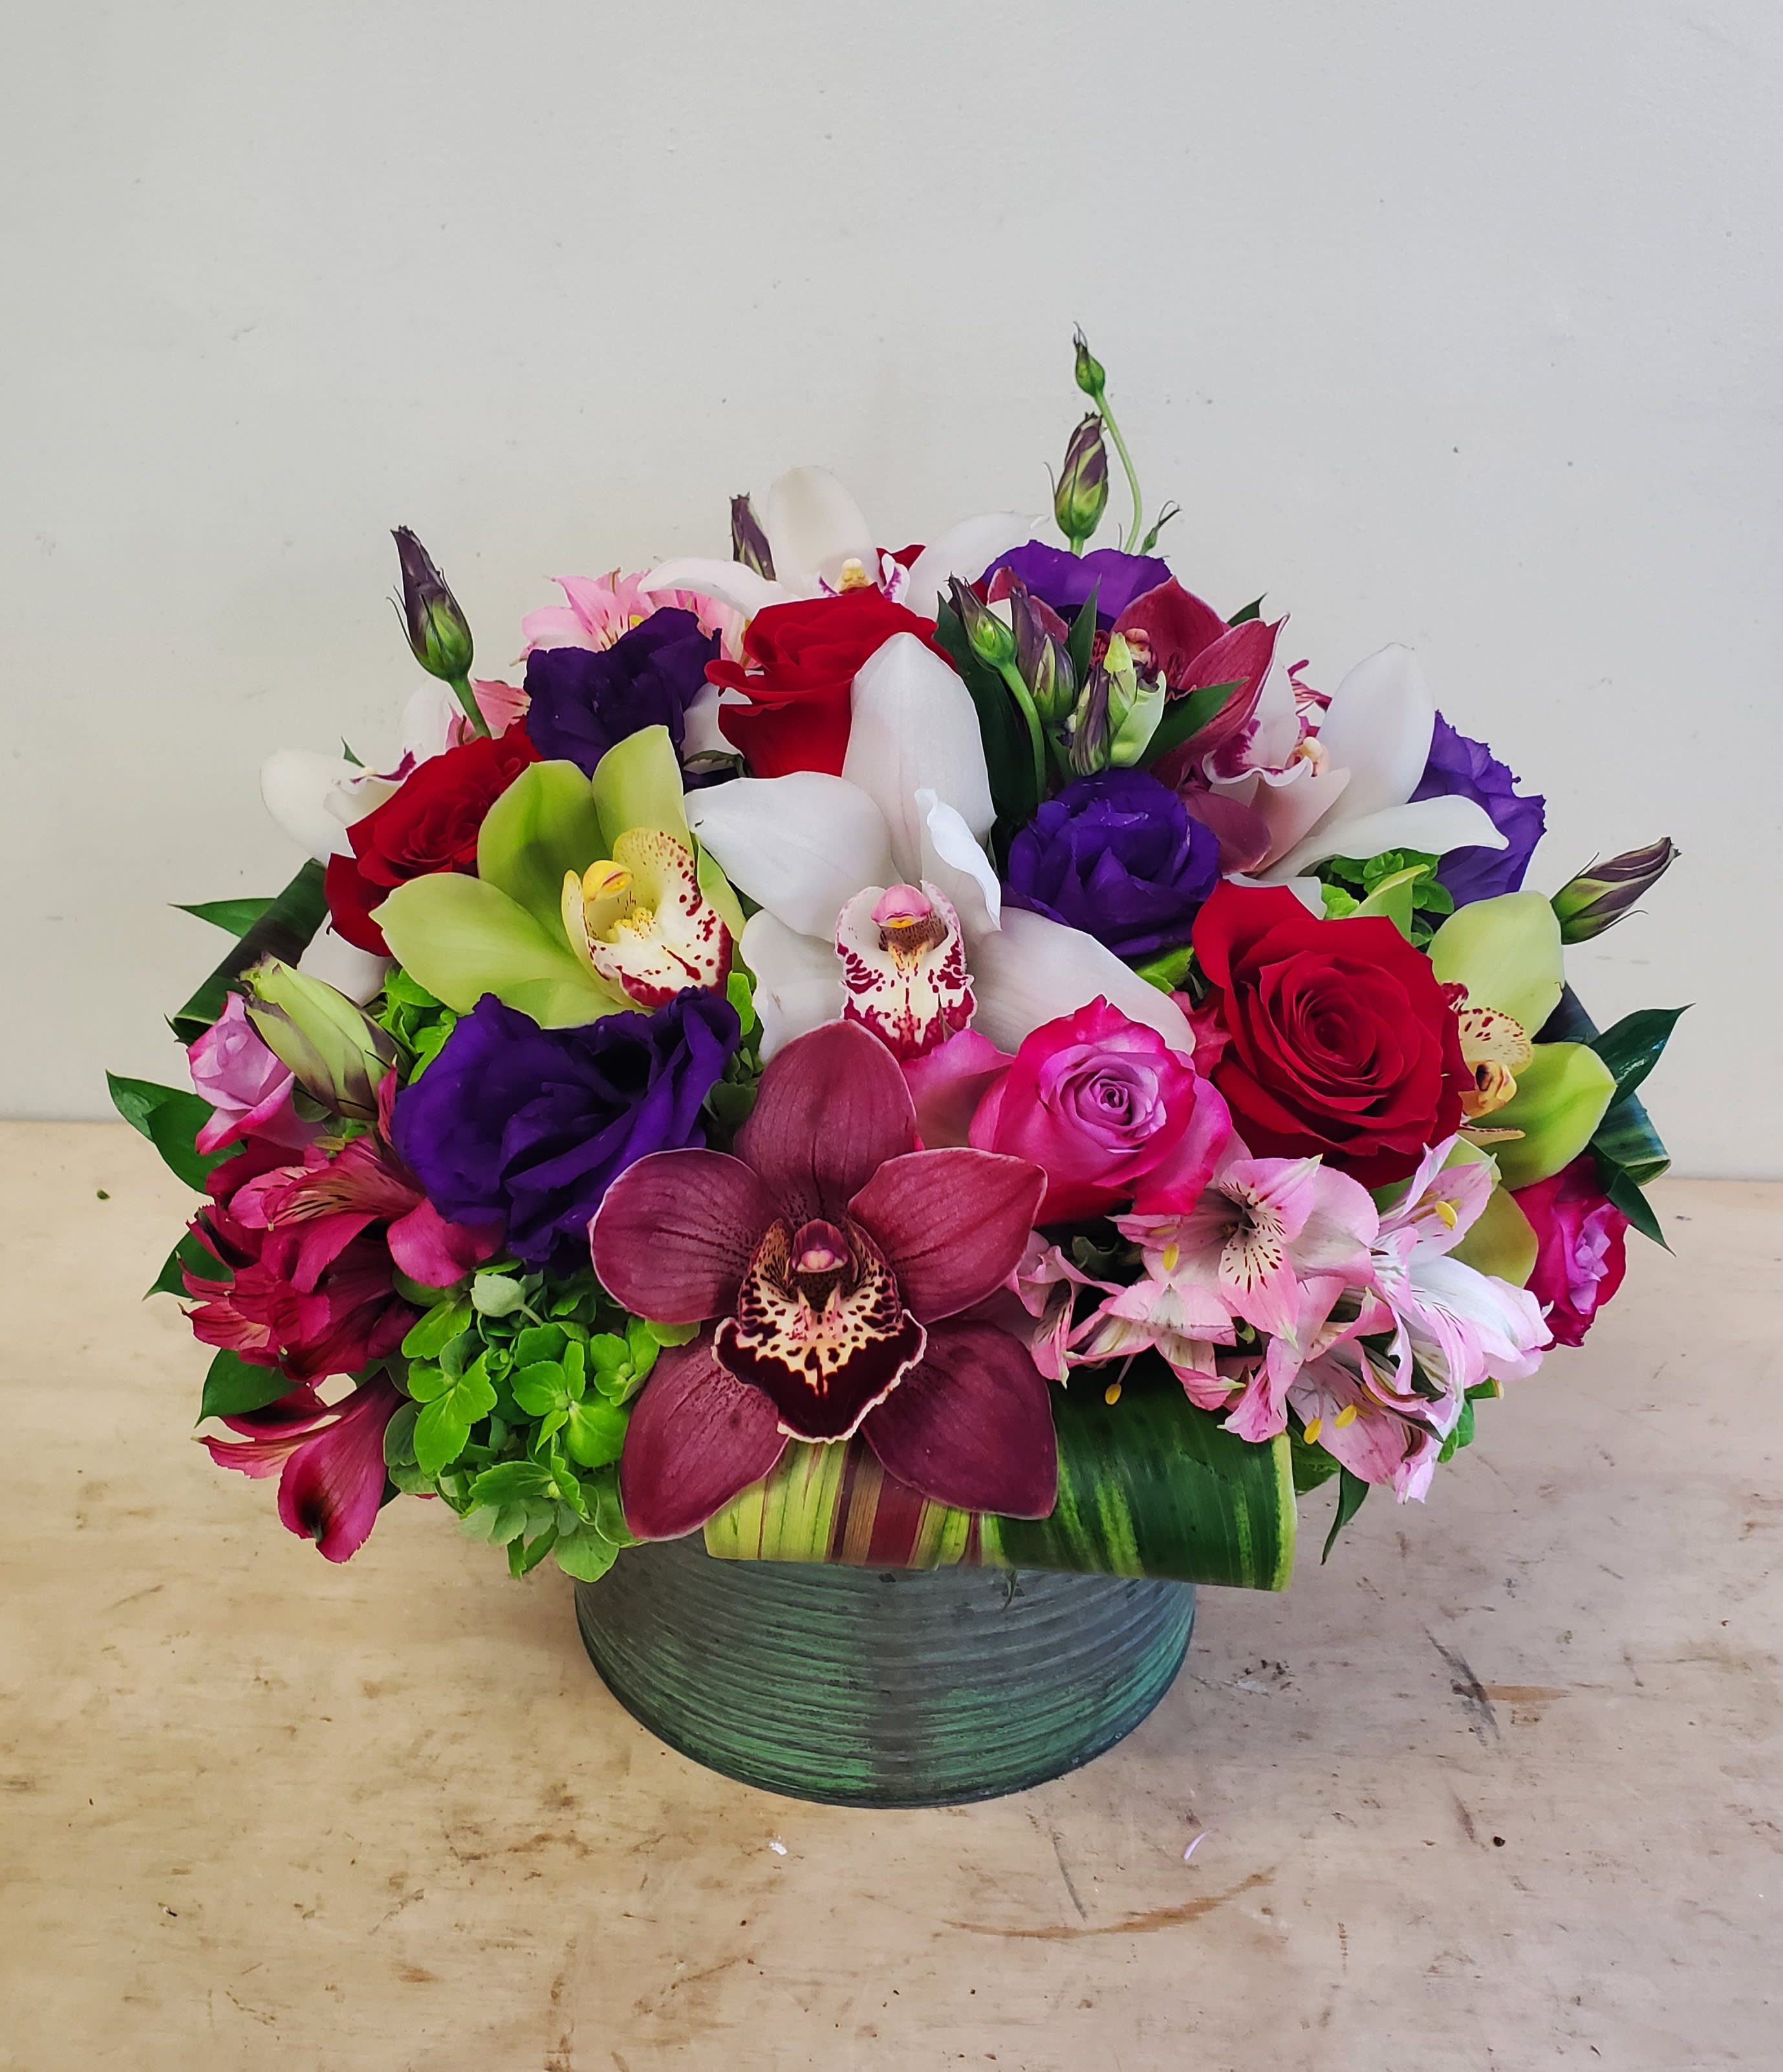 Magical Life Bouquet - Hand crafted bouquet of vibrant fresh orchids, roses, green hydrengea, lysianthus and multi color alstromerias accented with exotic leaves.  Sure to brighten the day of a special someone you love.